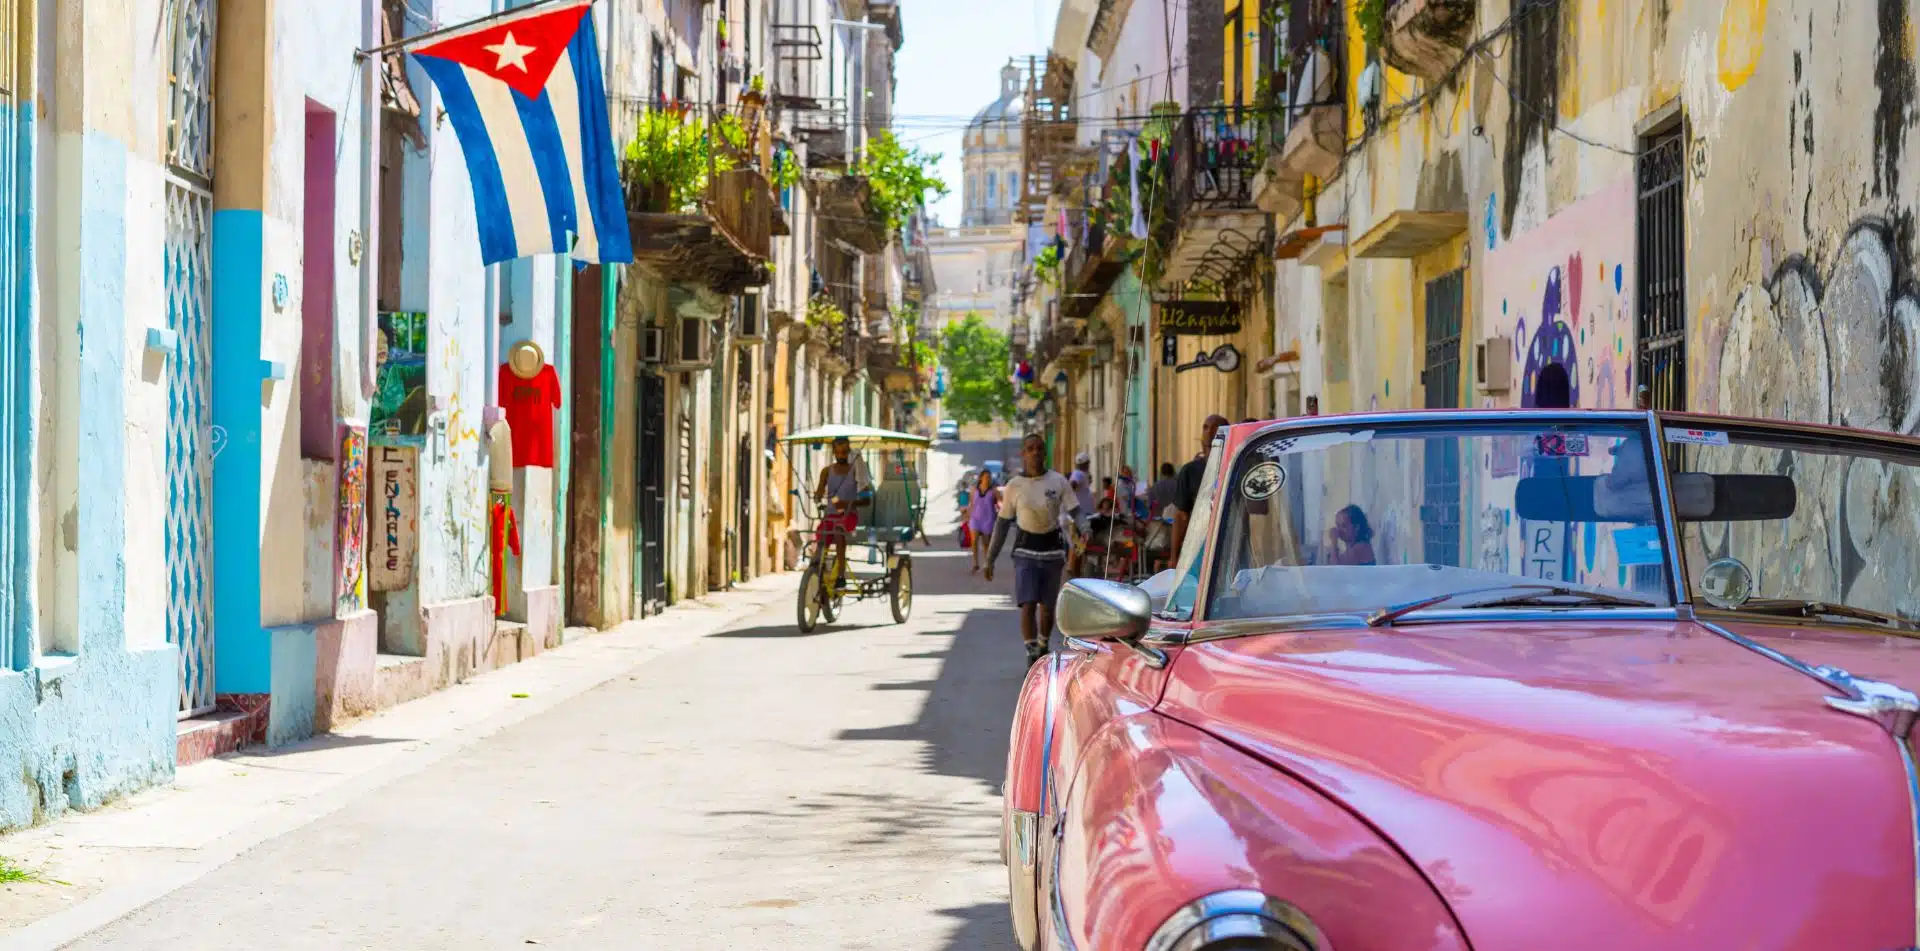 Get a fascinating look at local life with your expert Cuban guide